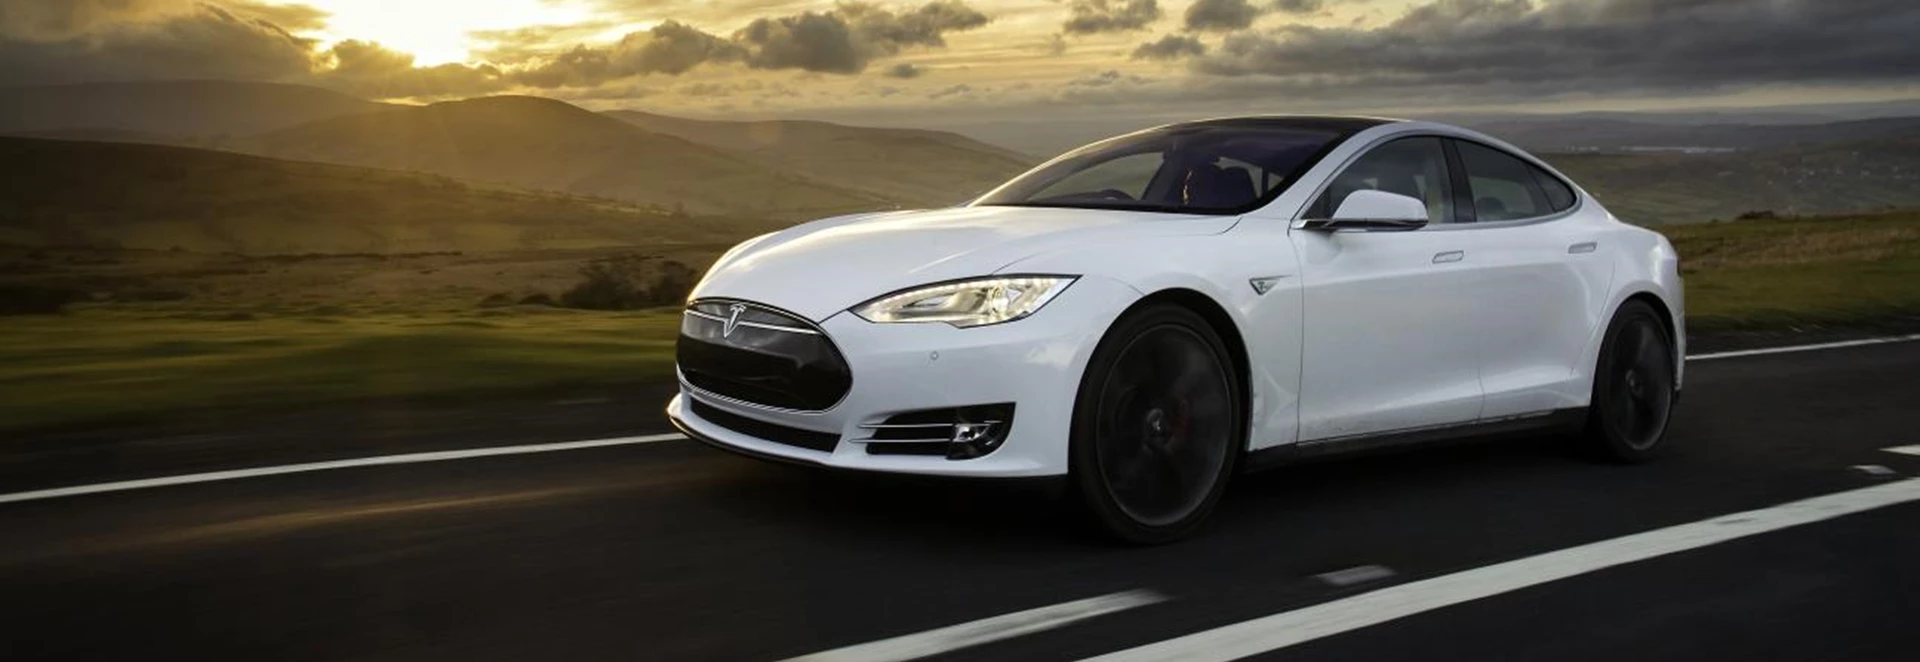 Tesla Model S travels 670 miles on a single charge to achieve record 